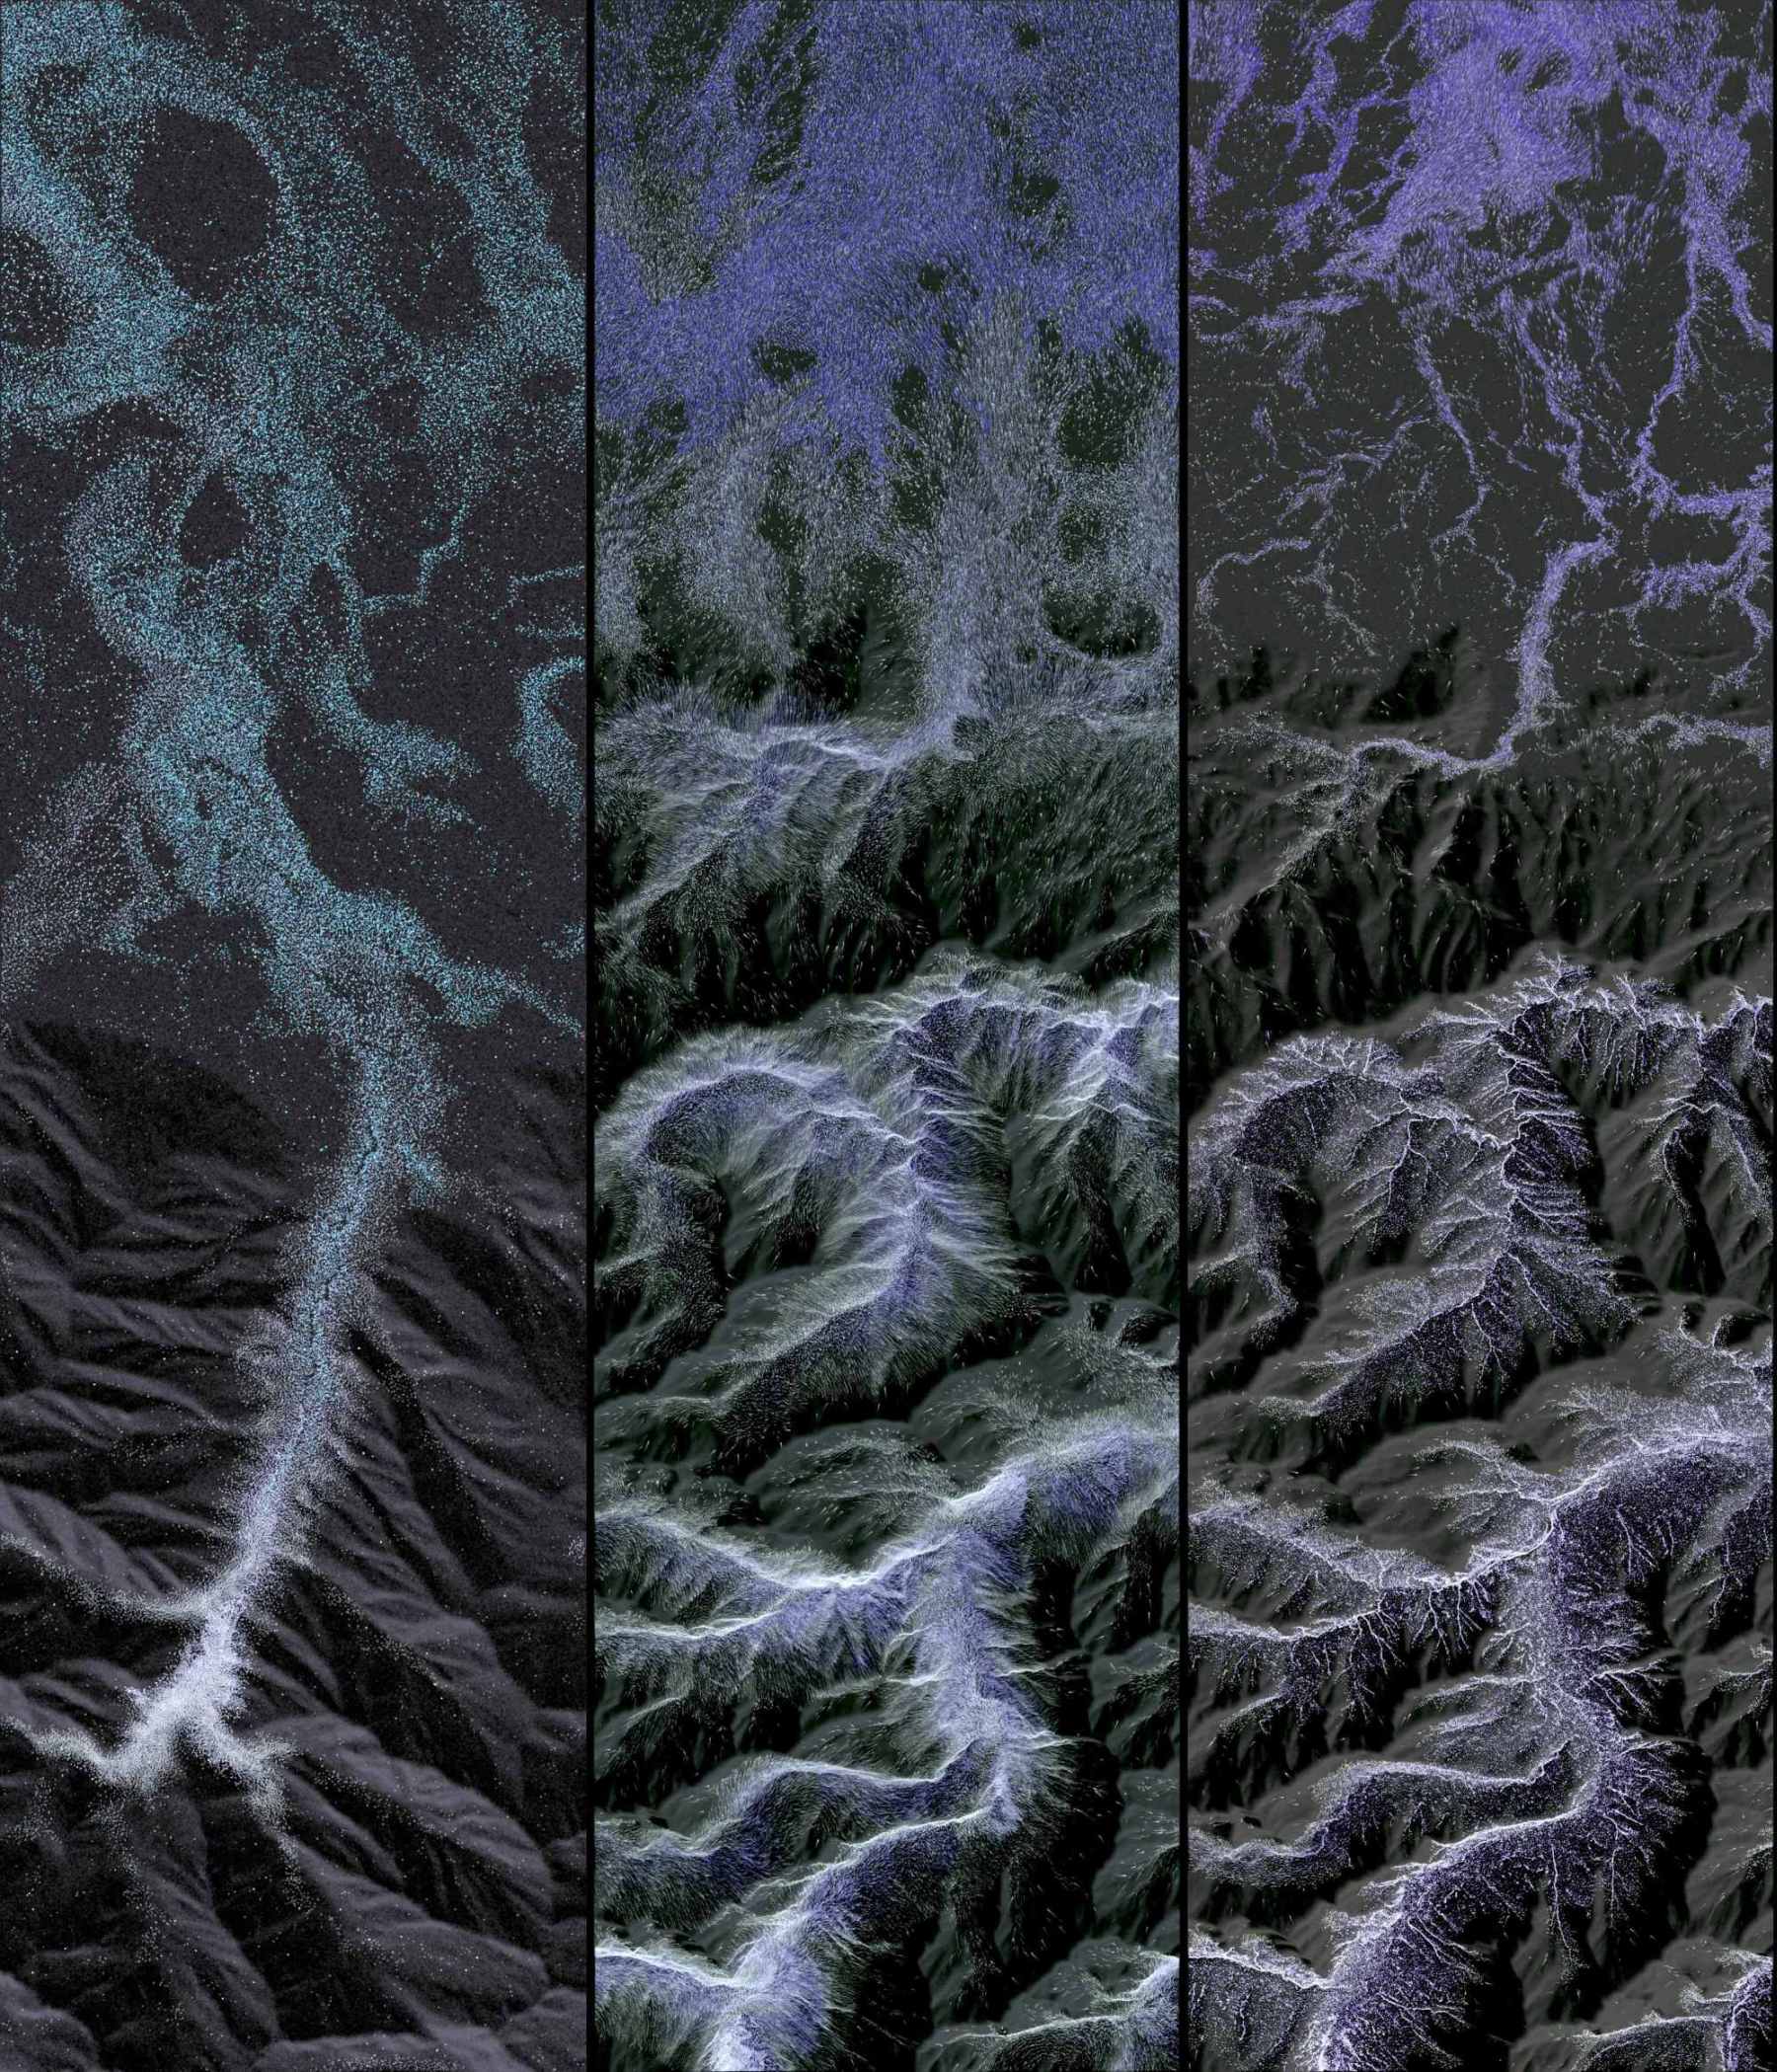 Screenshots of glacial simulation over time